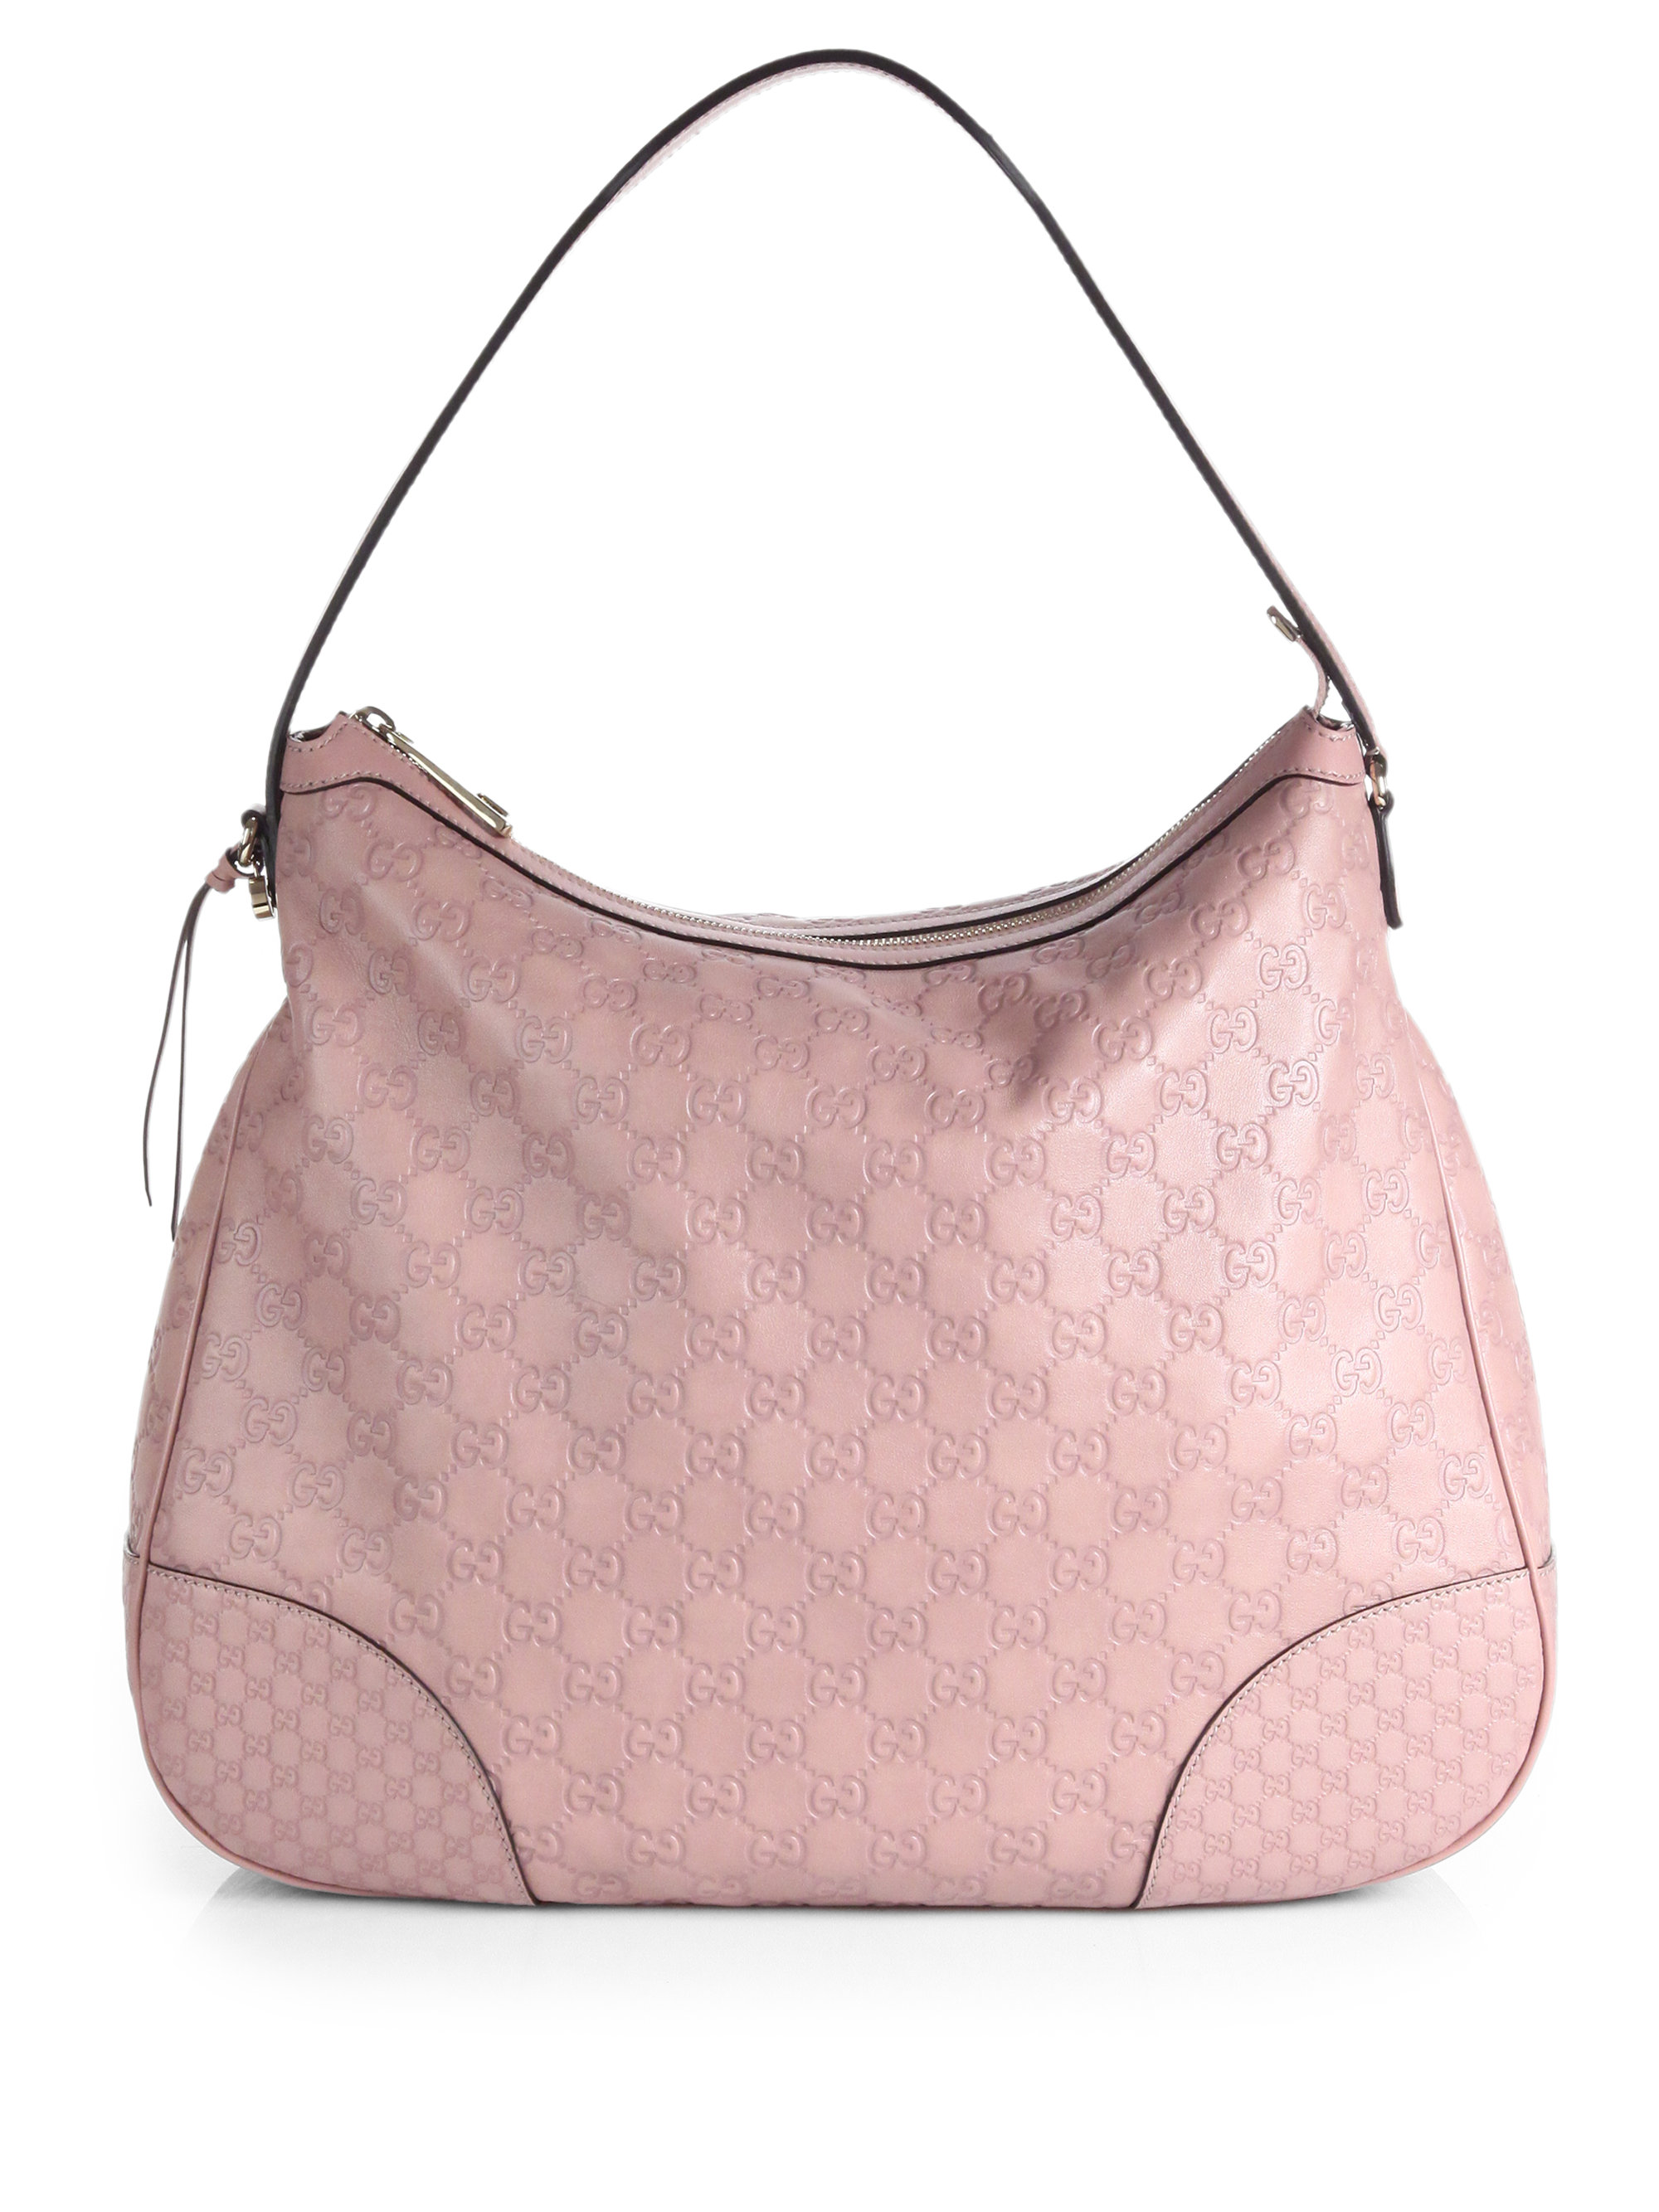 Gucci Bree Ssima Leather Hobo Bag in Pink (BLUSH) | Lyst